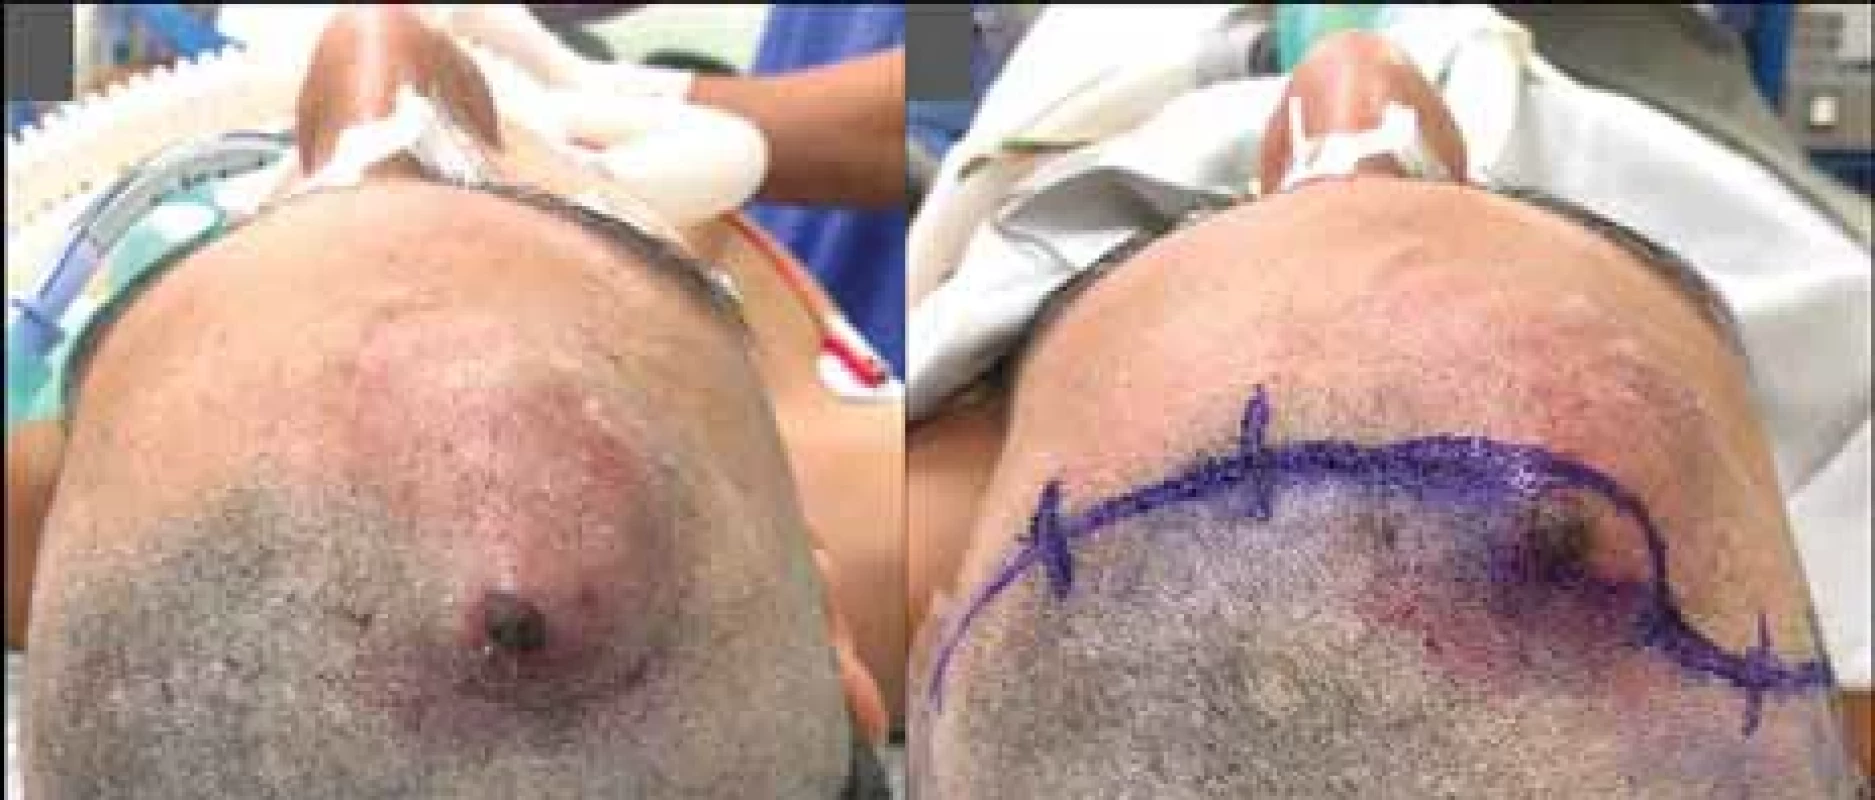 Photograph of the preoperative appearance of the skin before (A) and after (B) the surgical incision marking.